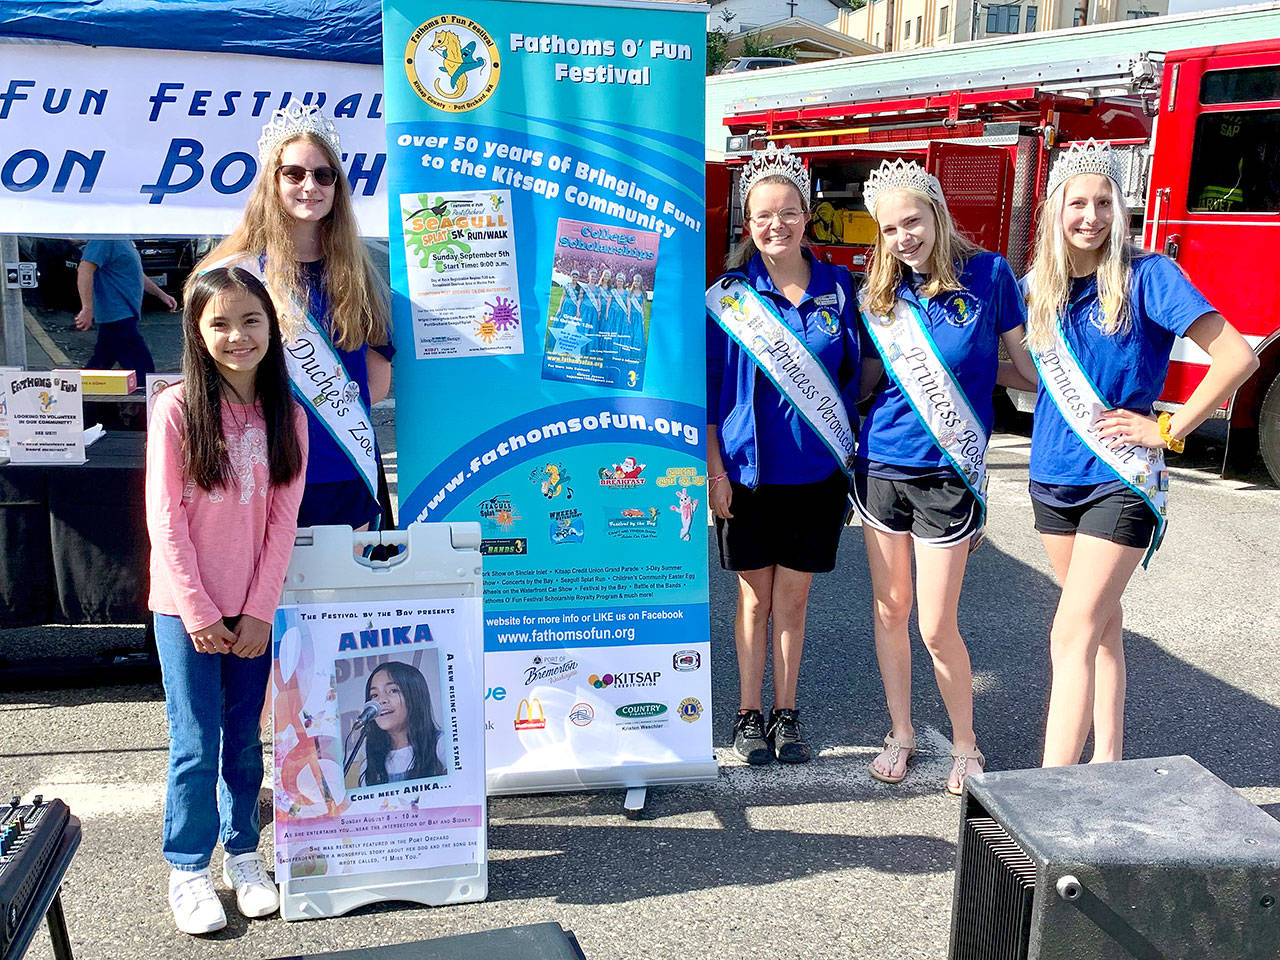 Manchester singer Anika (left) is joined by the Fathoms O’ Fun Festival princesses following her performance at the summer festival on Sunday. (Bob Smith | Kitsap Daily News)